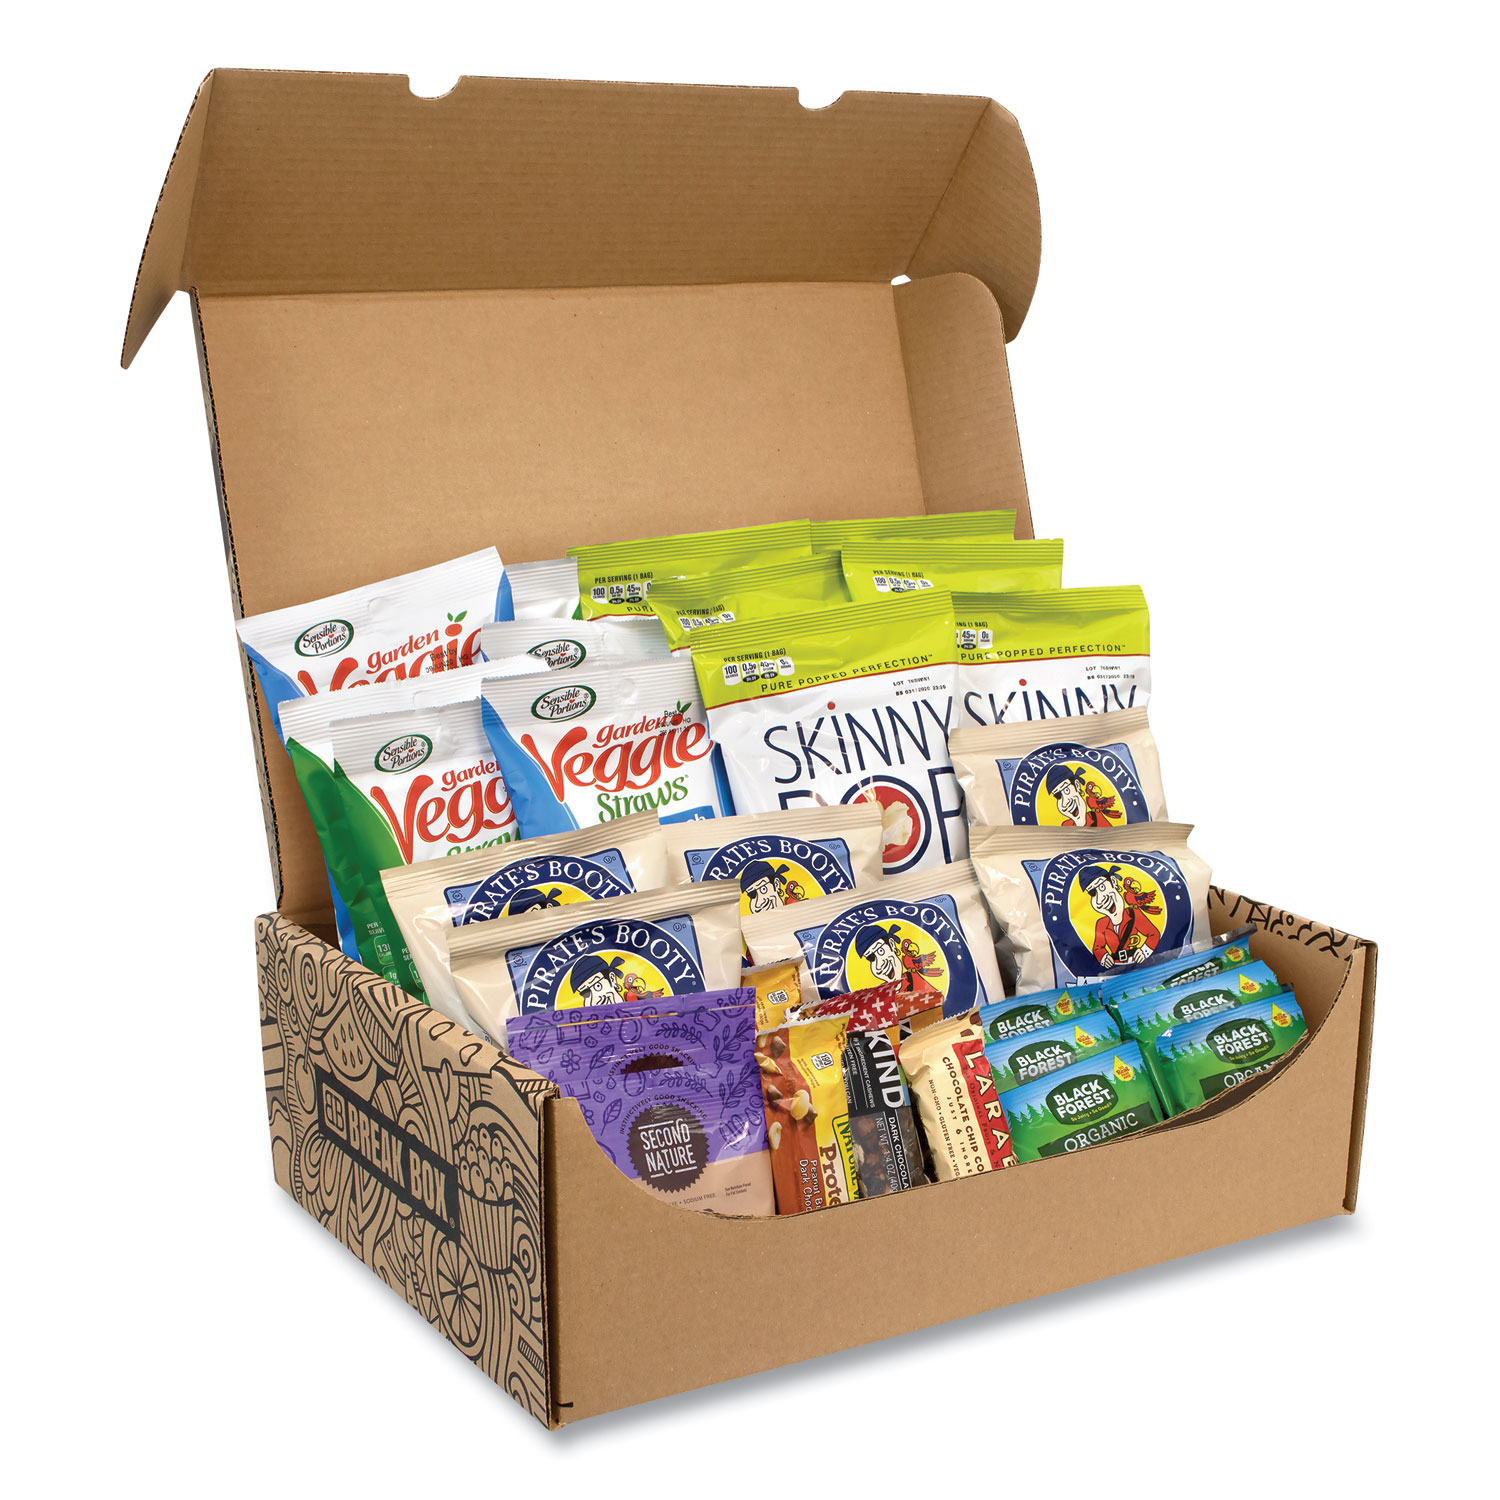  Snack Box Pros 70000004 Gluten Free Snack Box, 32 Assorted Snacks, Free Delivery in 1-4 Business Days (GRR700S0004) 